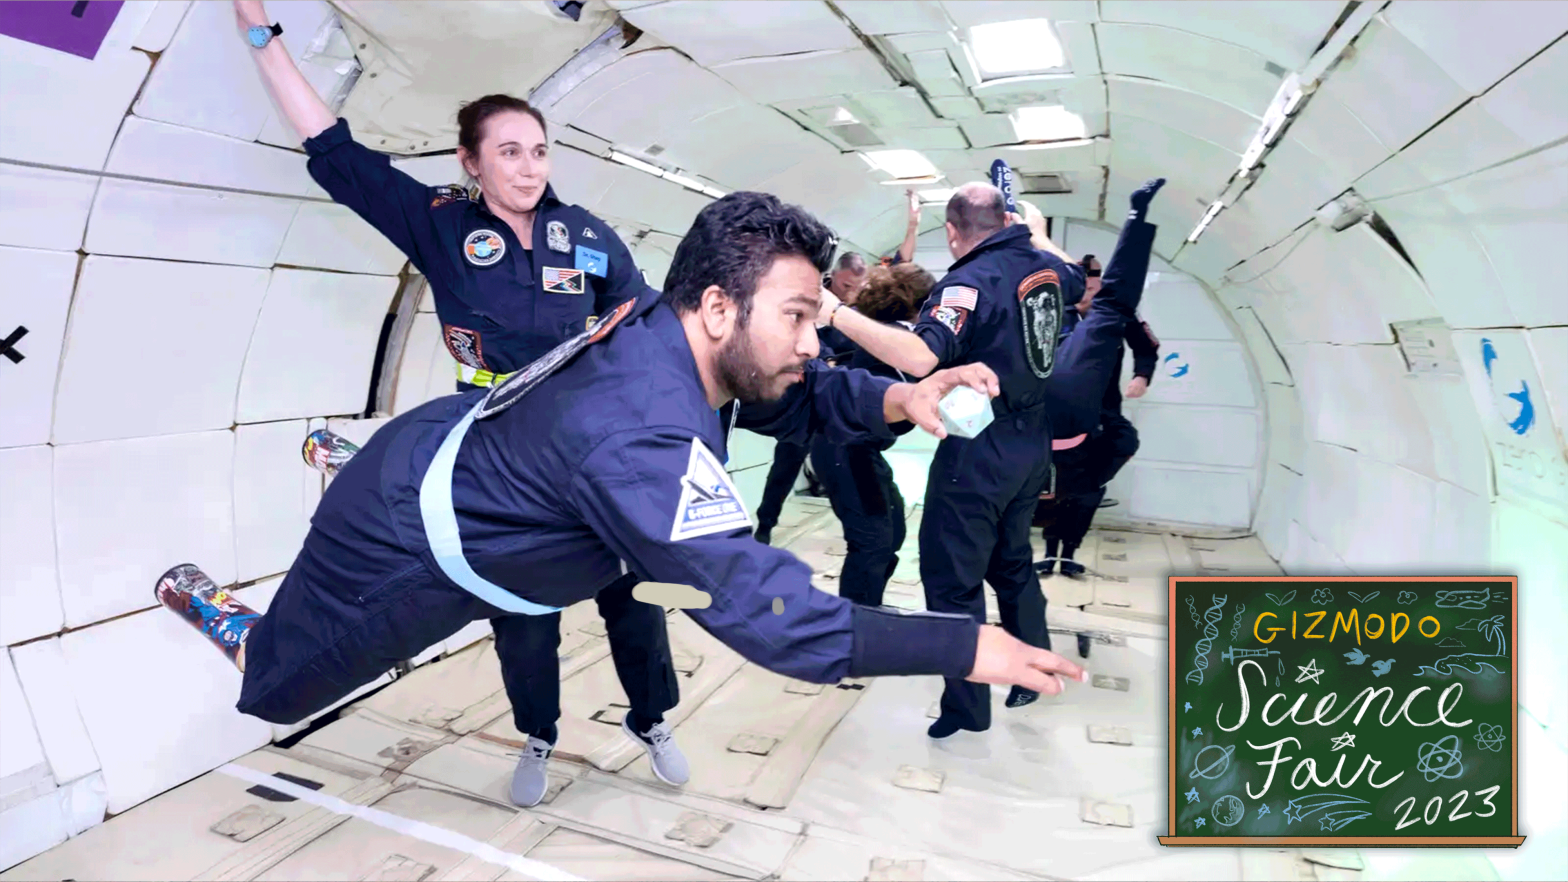 Dwayne Fernandes manoeuvres in zero-gravity to investigate possible navigation techniques for future space travel, with flight doctor Sheyna Gifford standing nearby, during an AstroAccess research flight performed above Texas on December 15, 2022. (Photo: Tasha Dixon Graphics: Vicky Leta)